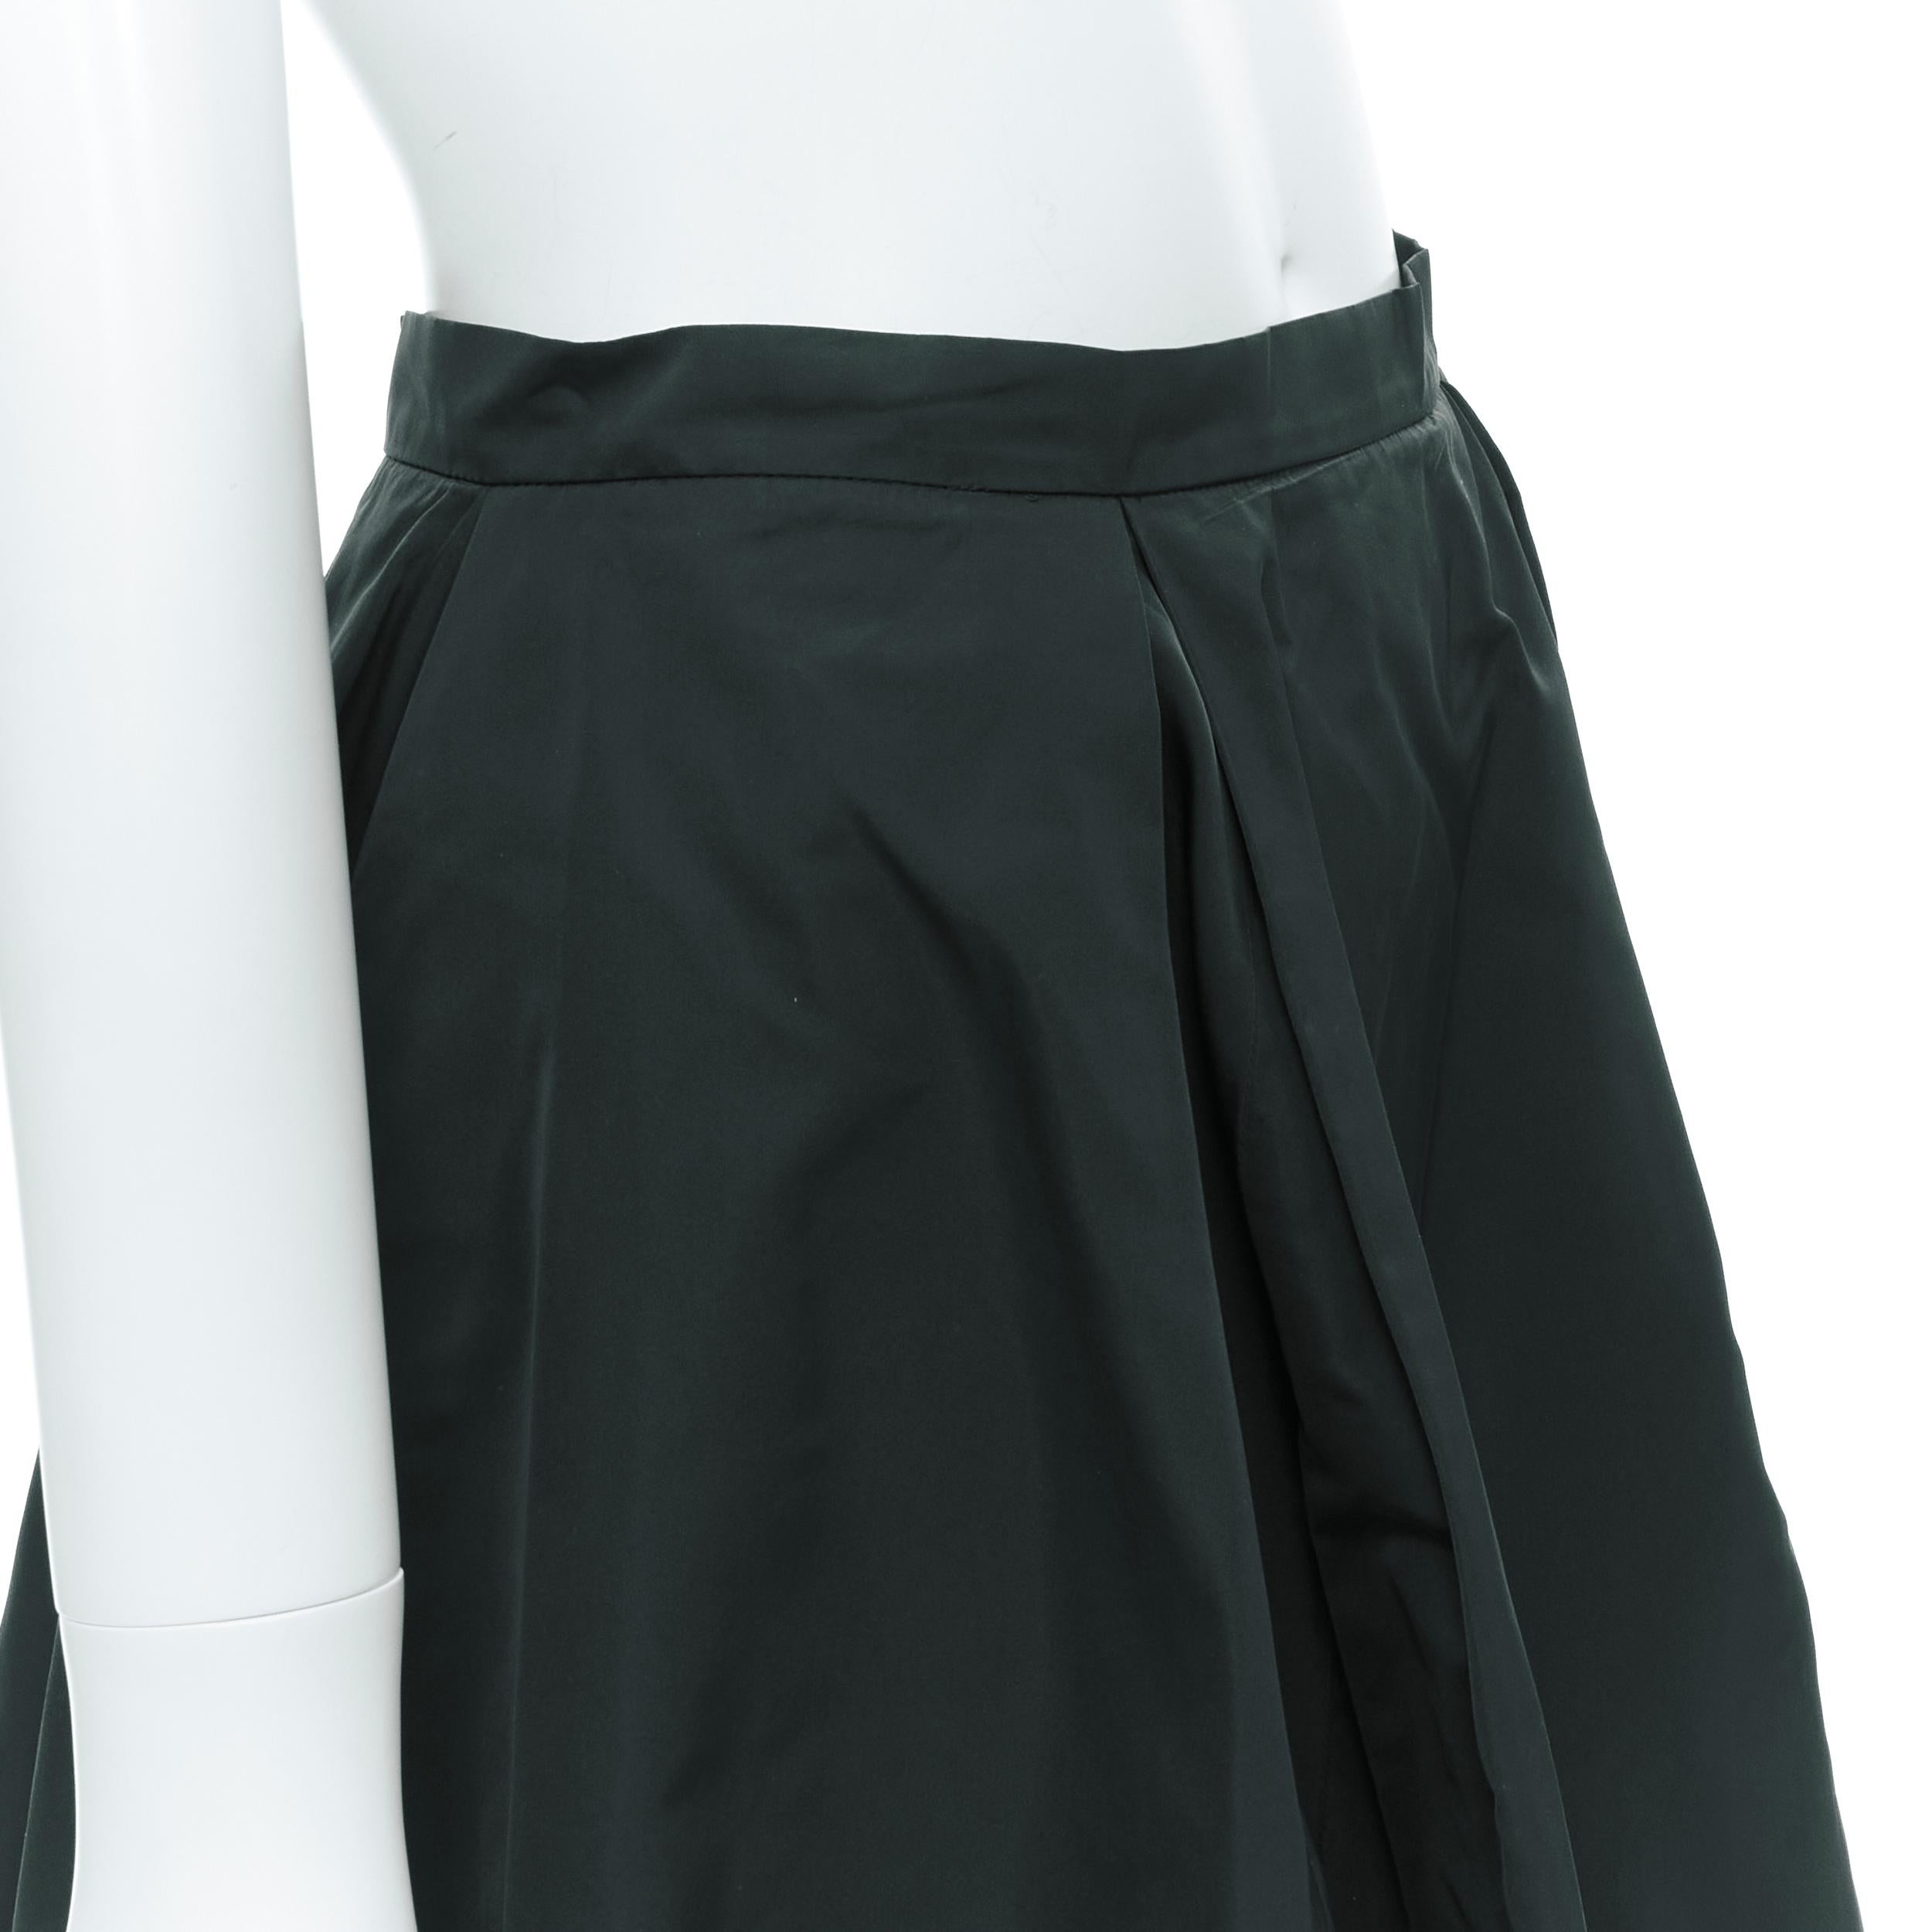 JIL SANDER dark green polyester silk A-line flared skirt FR34 XS 
Reference: LNKO/A01964 
Brand: Jil Sander 
Material: Polyester 
Color: Green 
Pattern: Solid 
Closure: Zip 
Extra Detail: Dual front pleat. Side zip closure. 
Made in: Italy